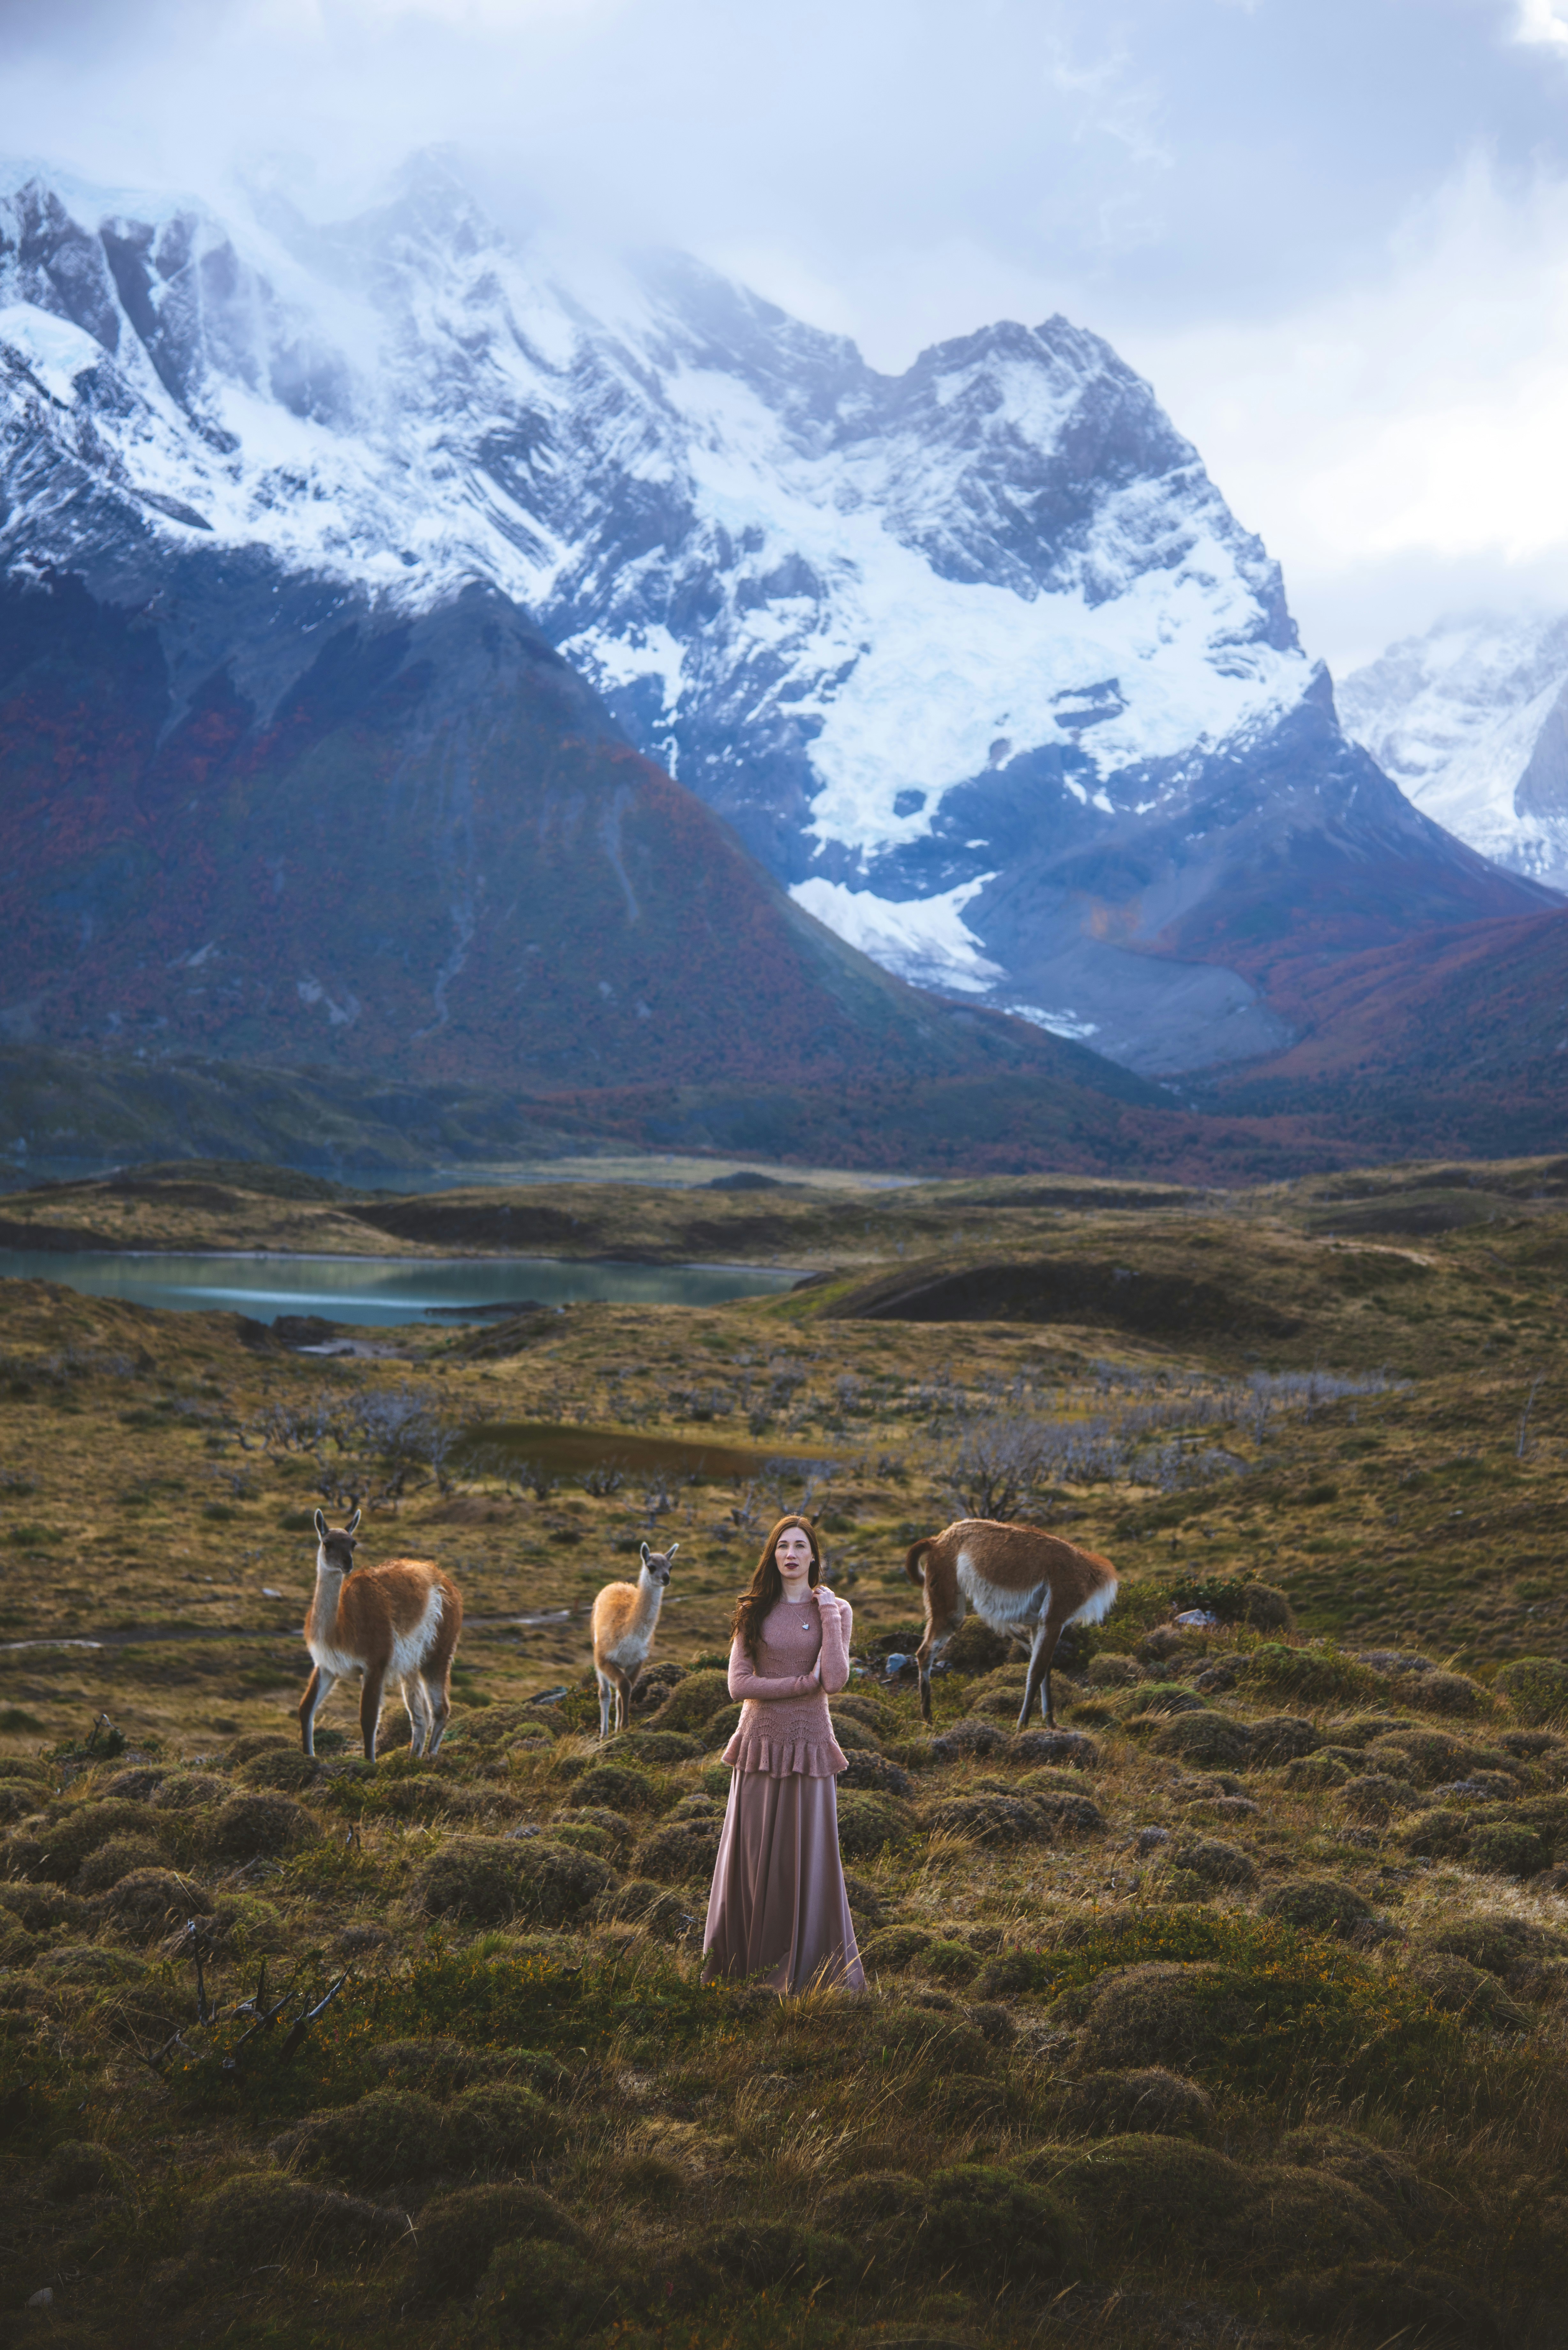 Girl posing with guanacos in the wild Patagonian landscape